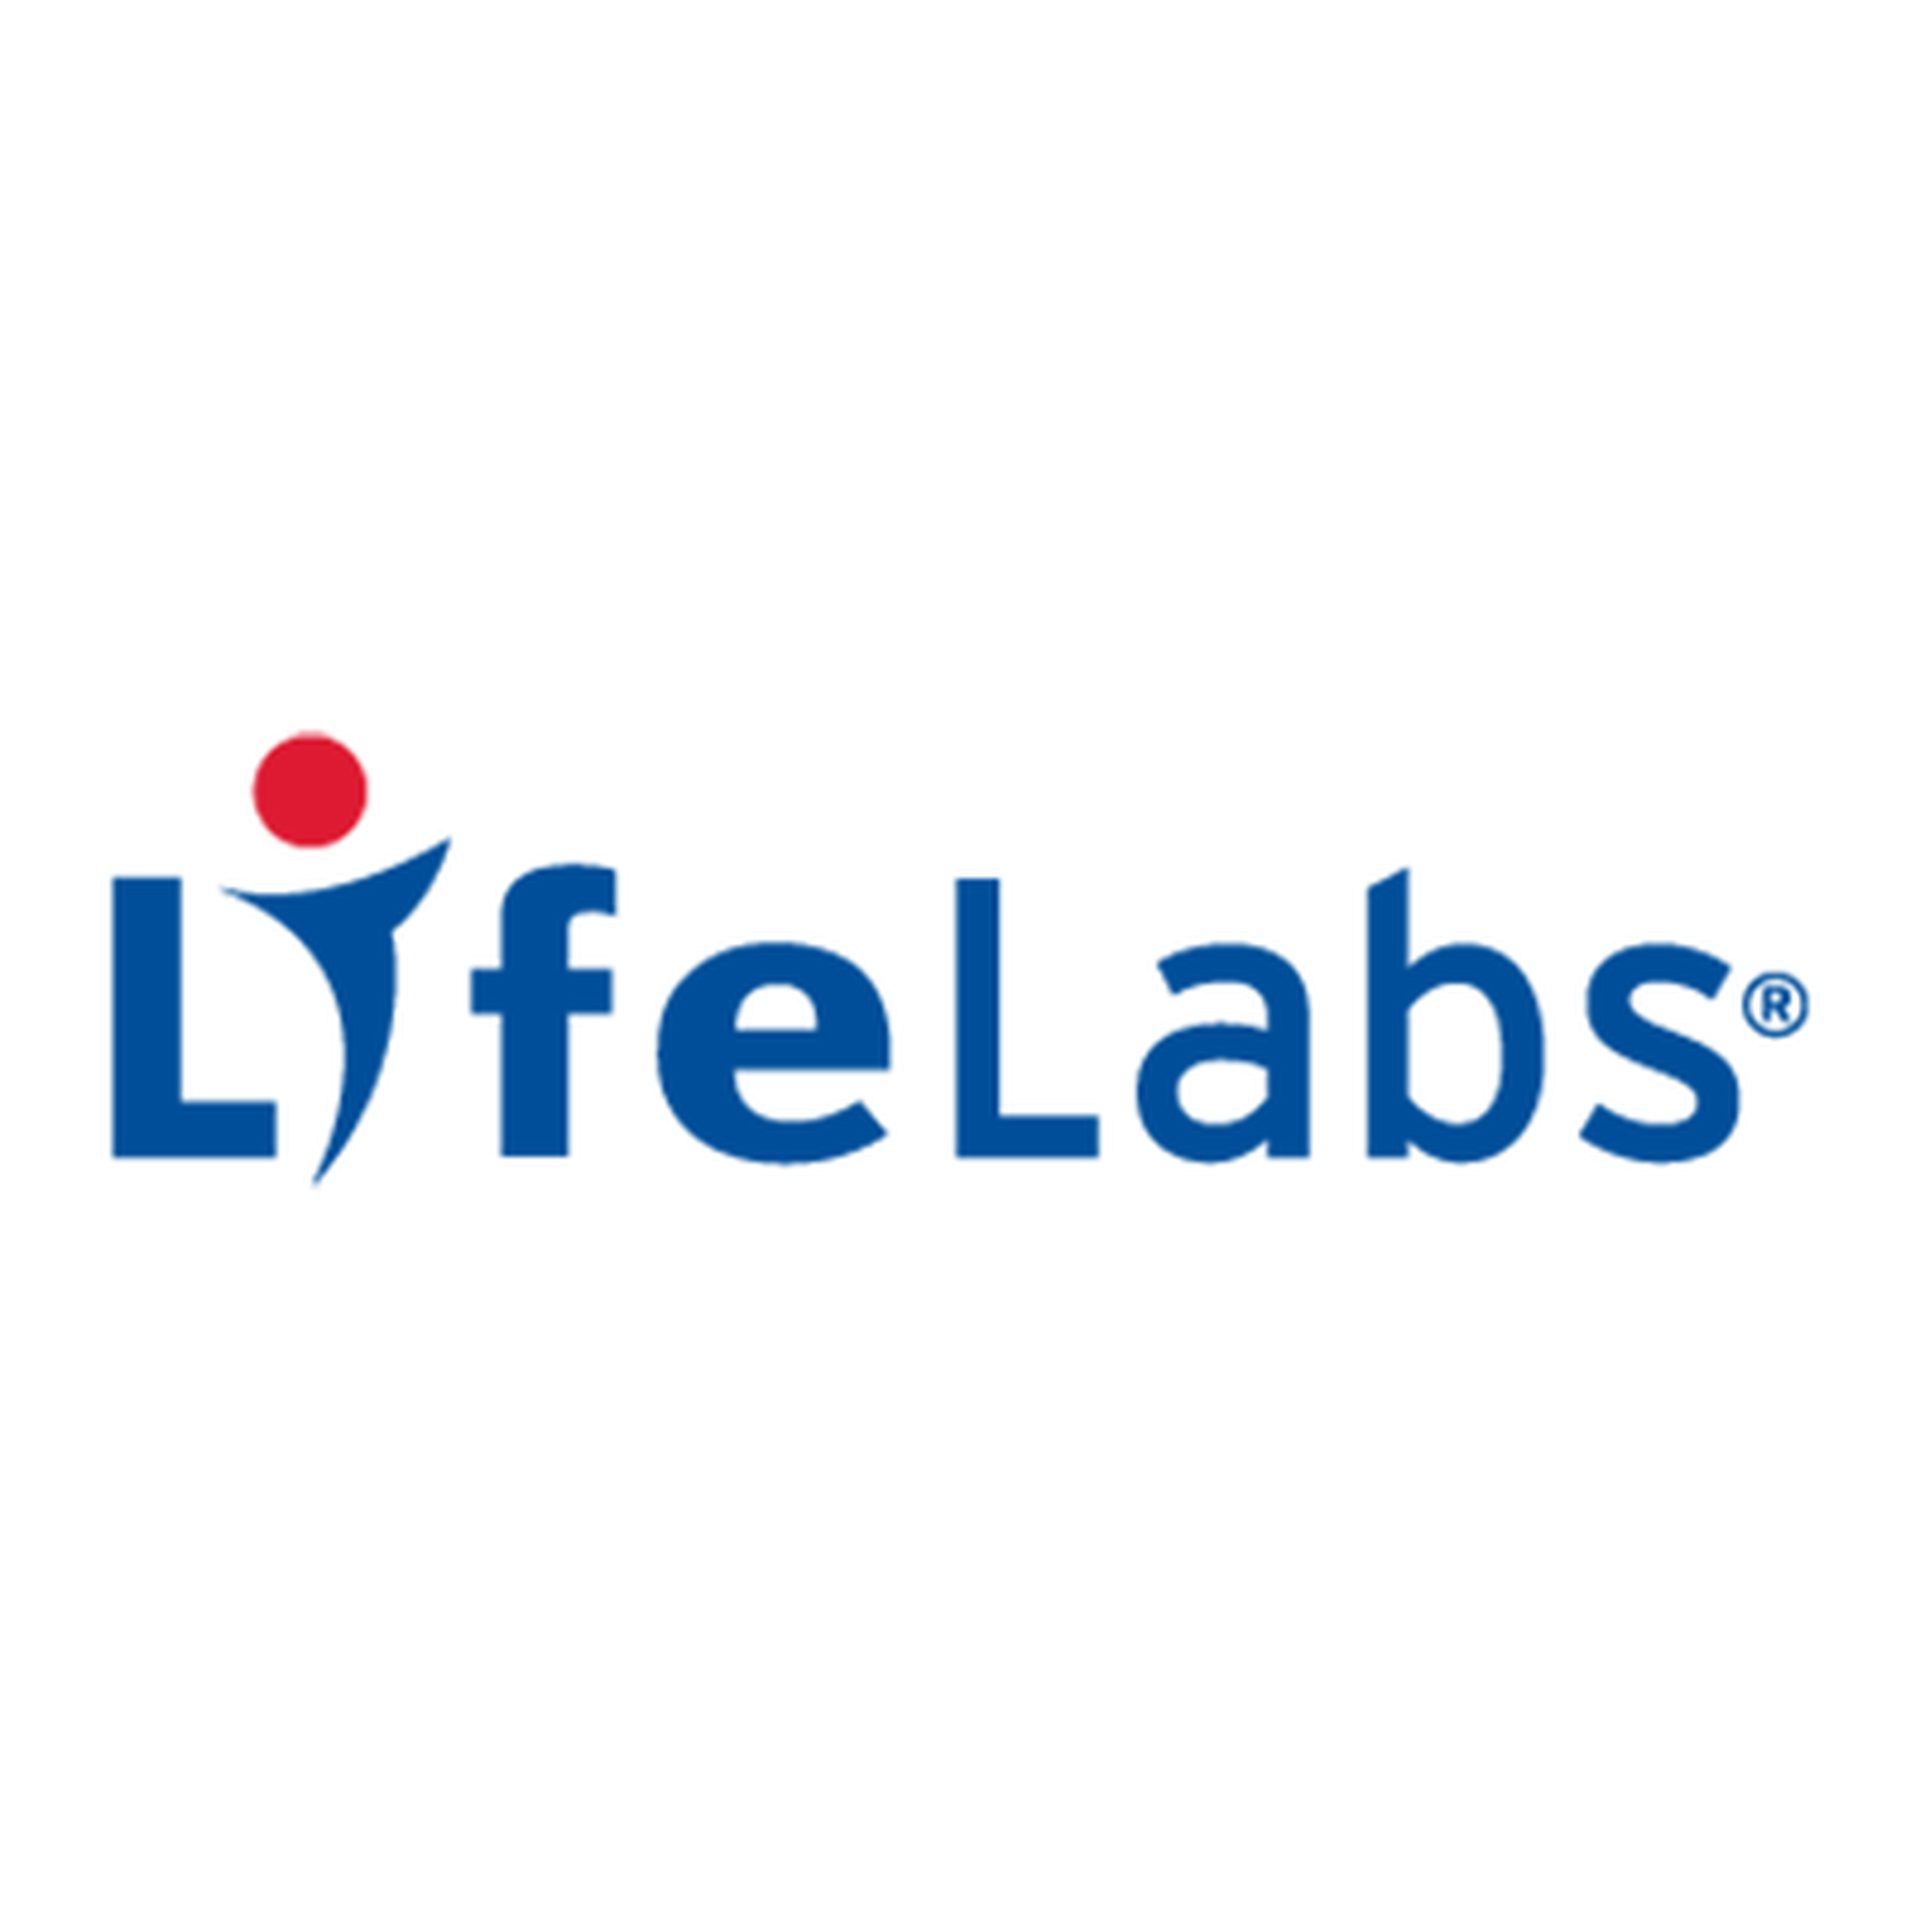 LifeLabs data breach class action settlement explained in this article. Keep reading and learn everything you need to know about it!